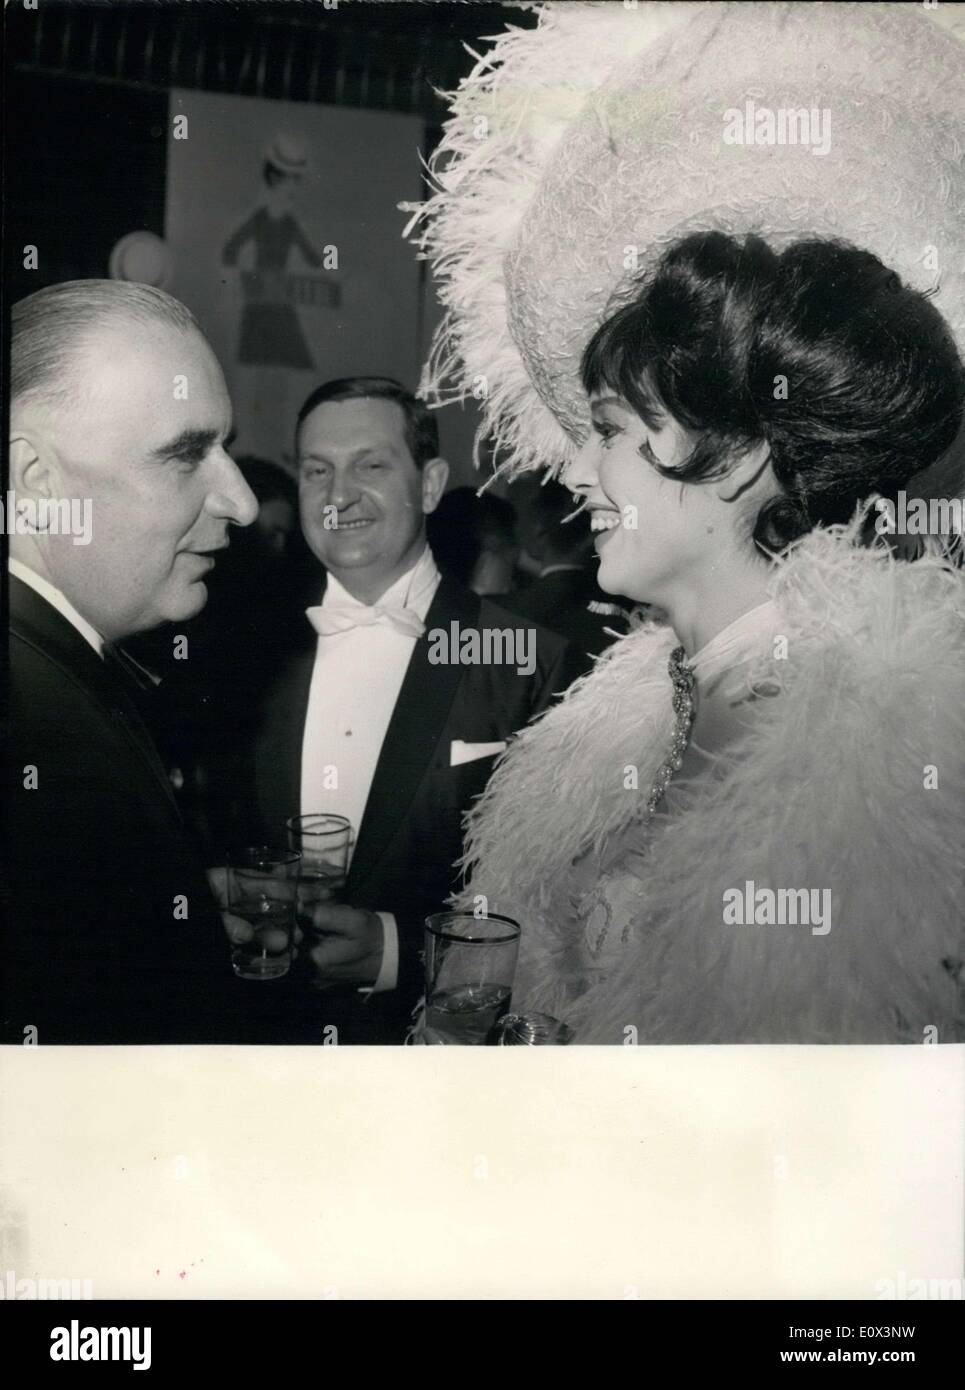 Mar. 13, 1965 - Mr. Pompidou talks with Italian actress Elsa Martinelli at the Artist Union's Gala held at Paris's Winter Circus. Jacques Charron, from the Comedie Francaise, is in the middle. Stock Photo